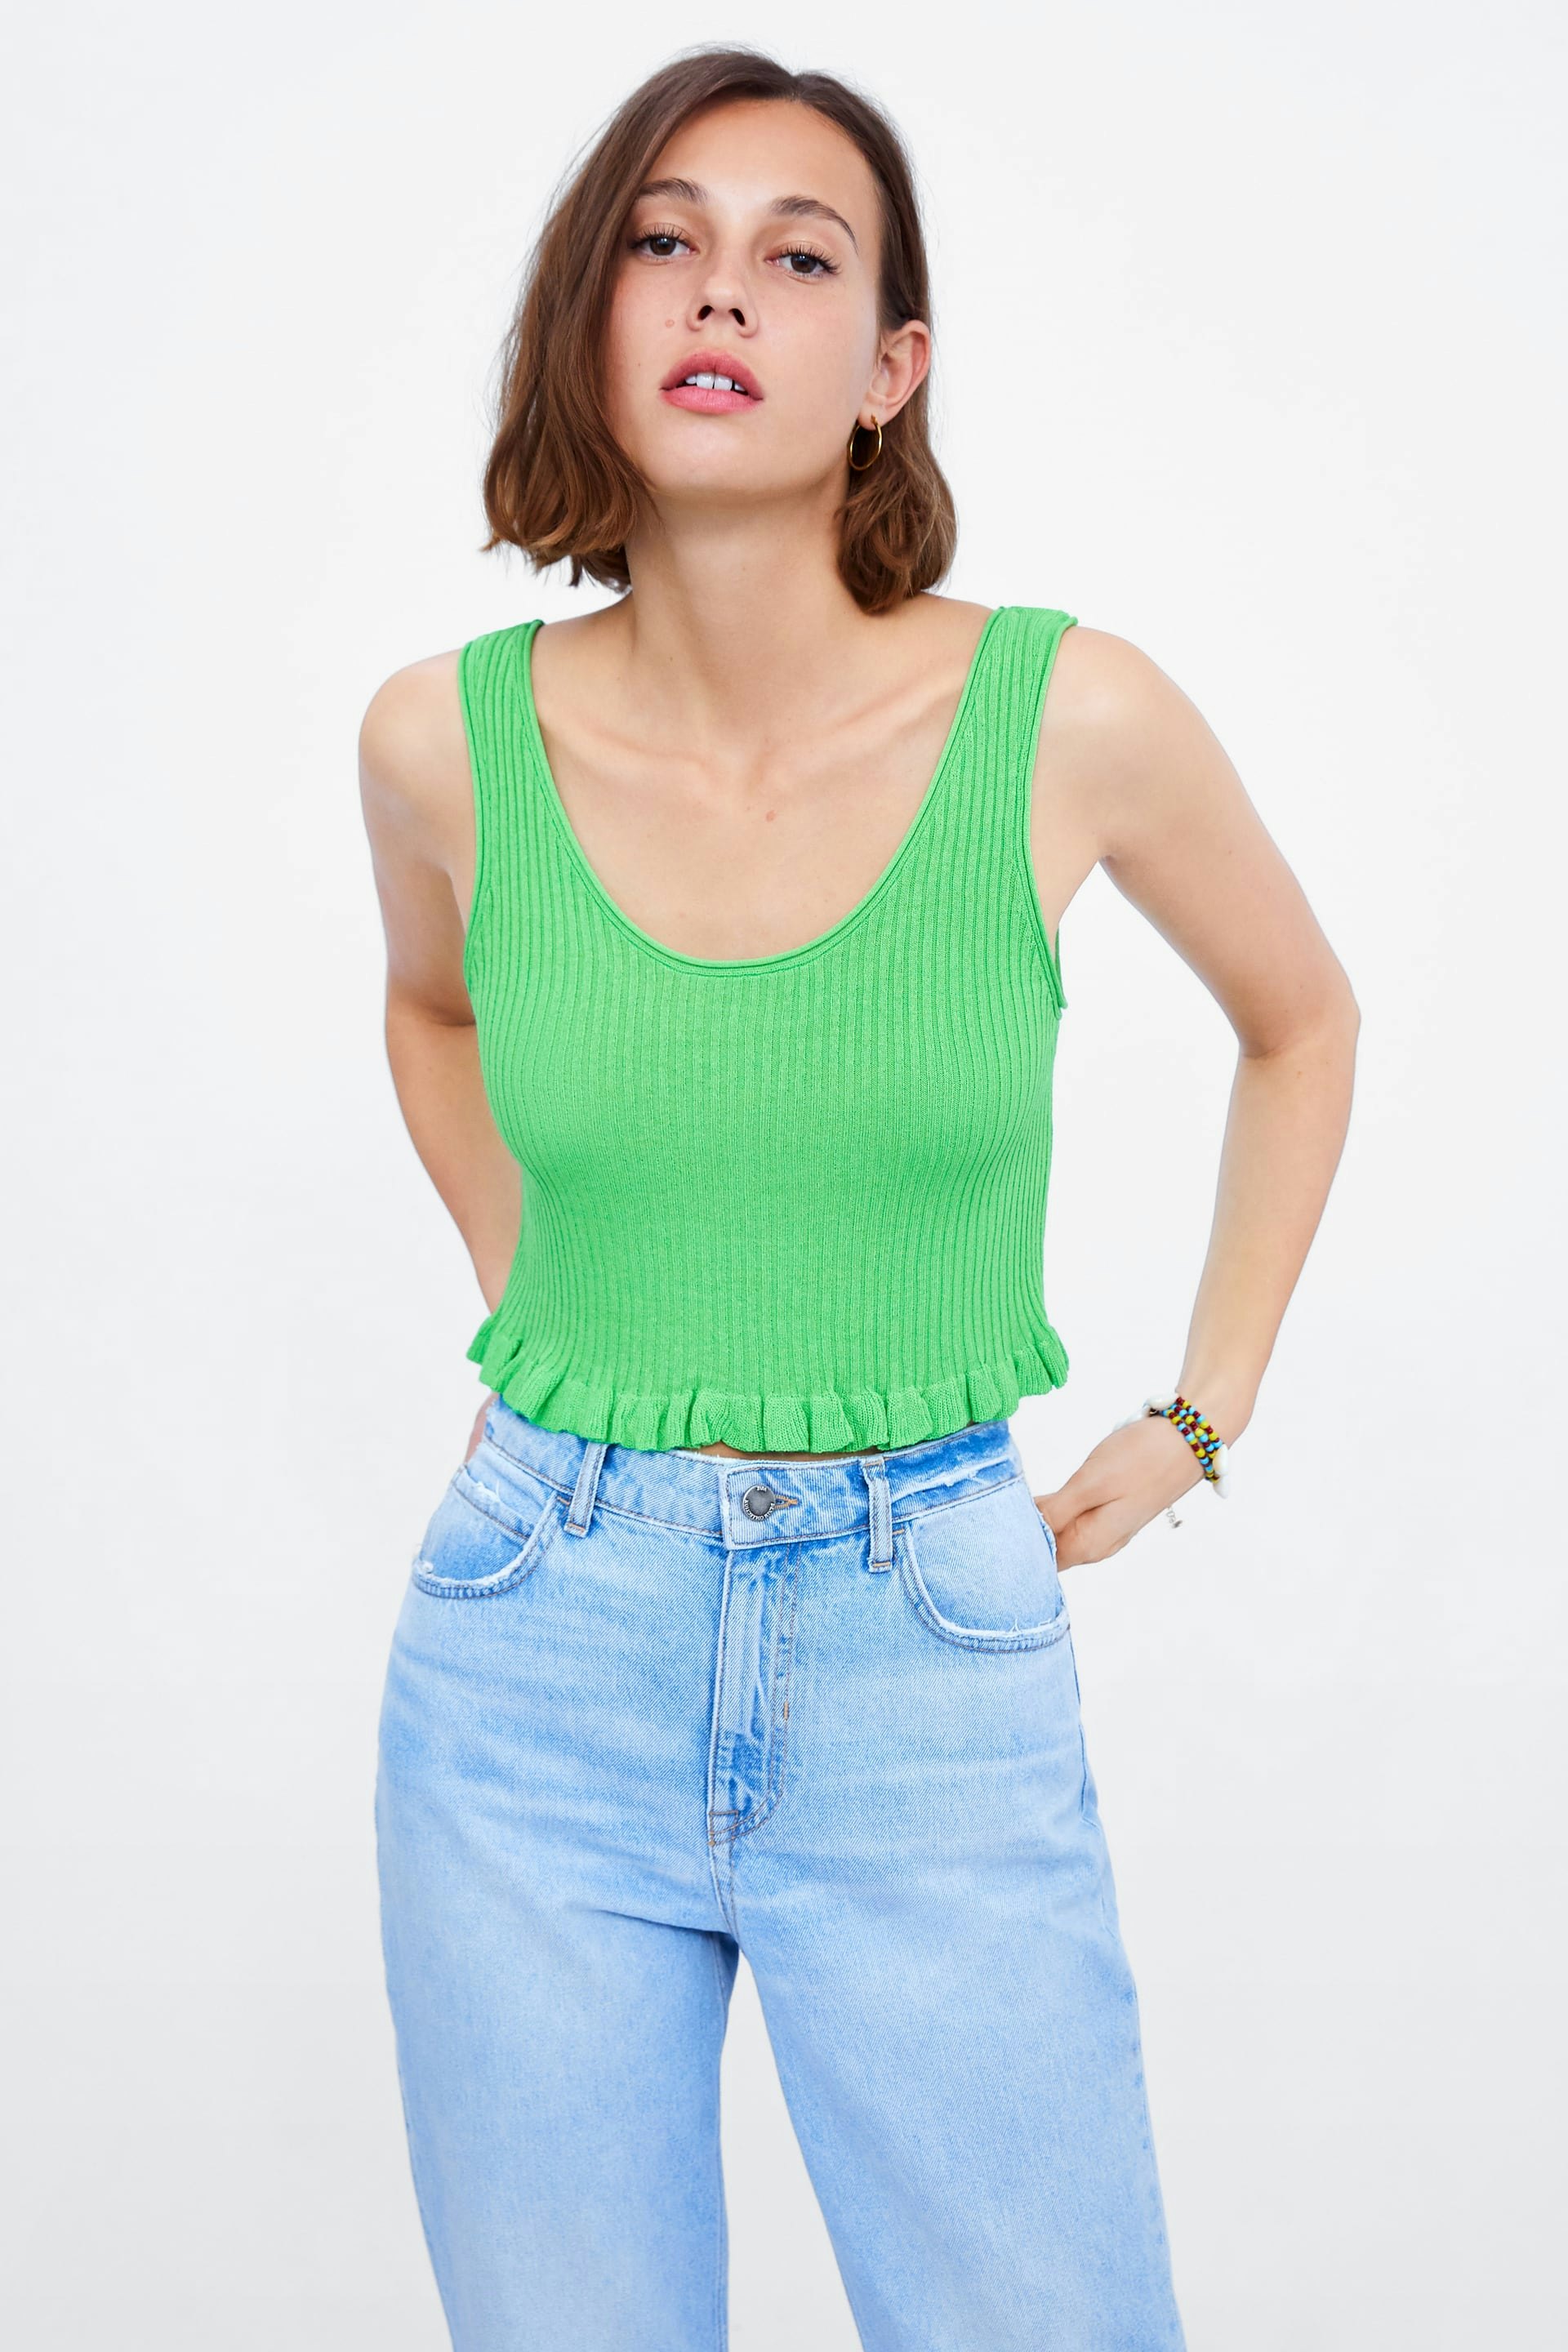 20 Cute, Basic Crop Tops To Wear Literally Everywhere This Summer